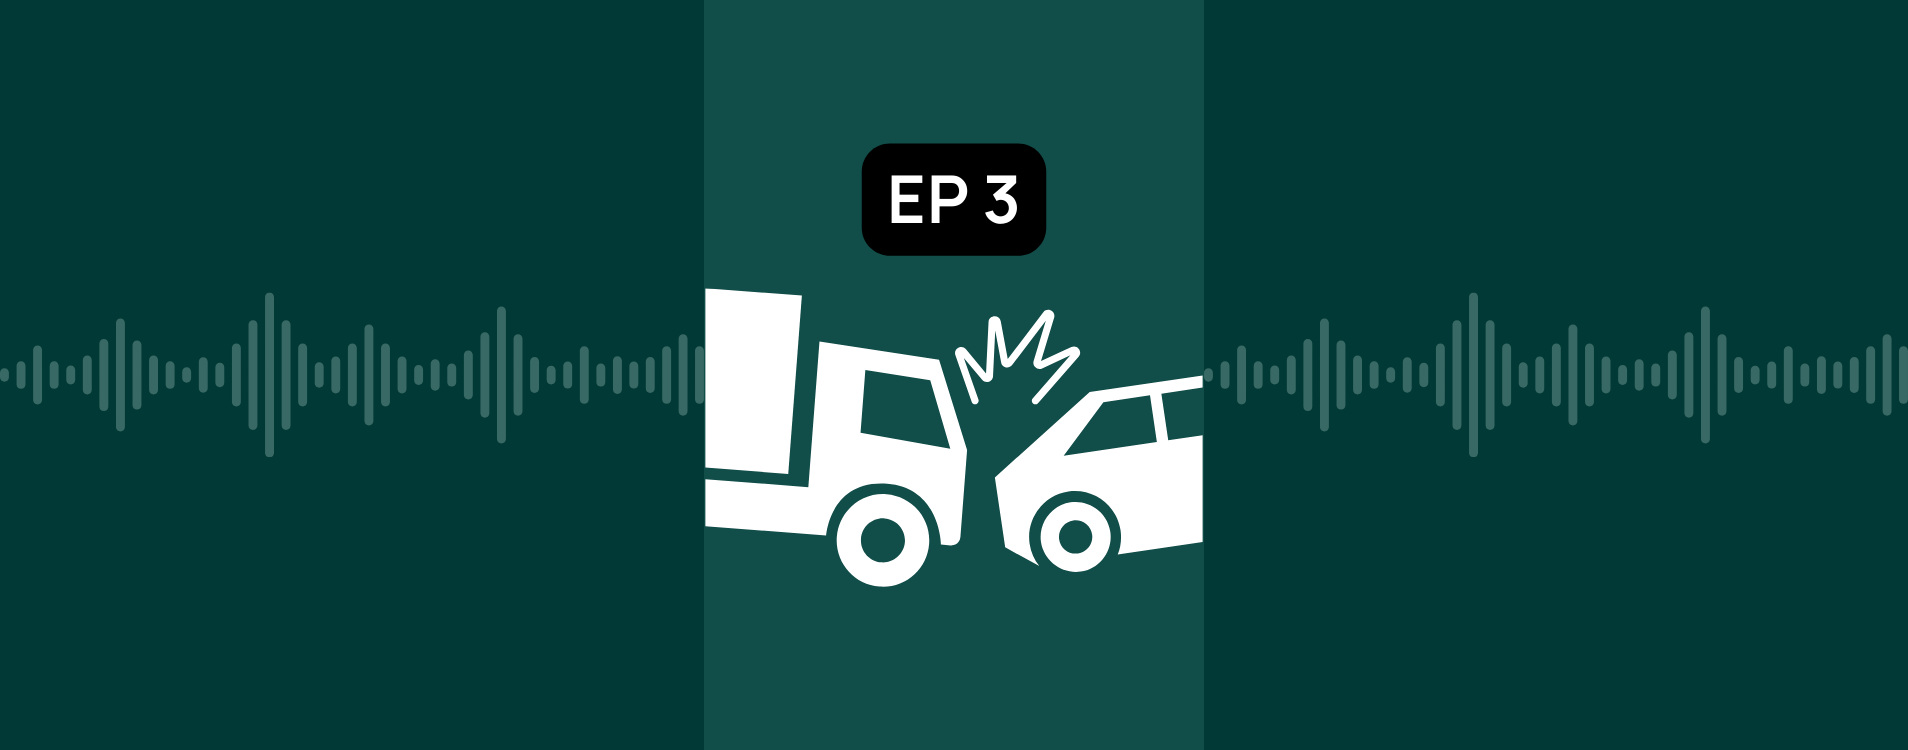 Episode 3 of This Week in Trucking